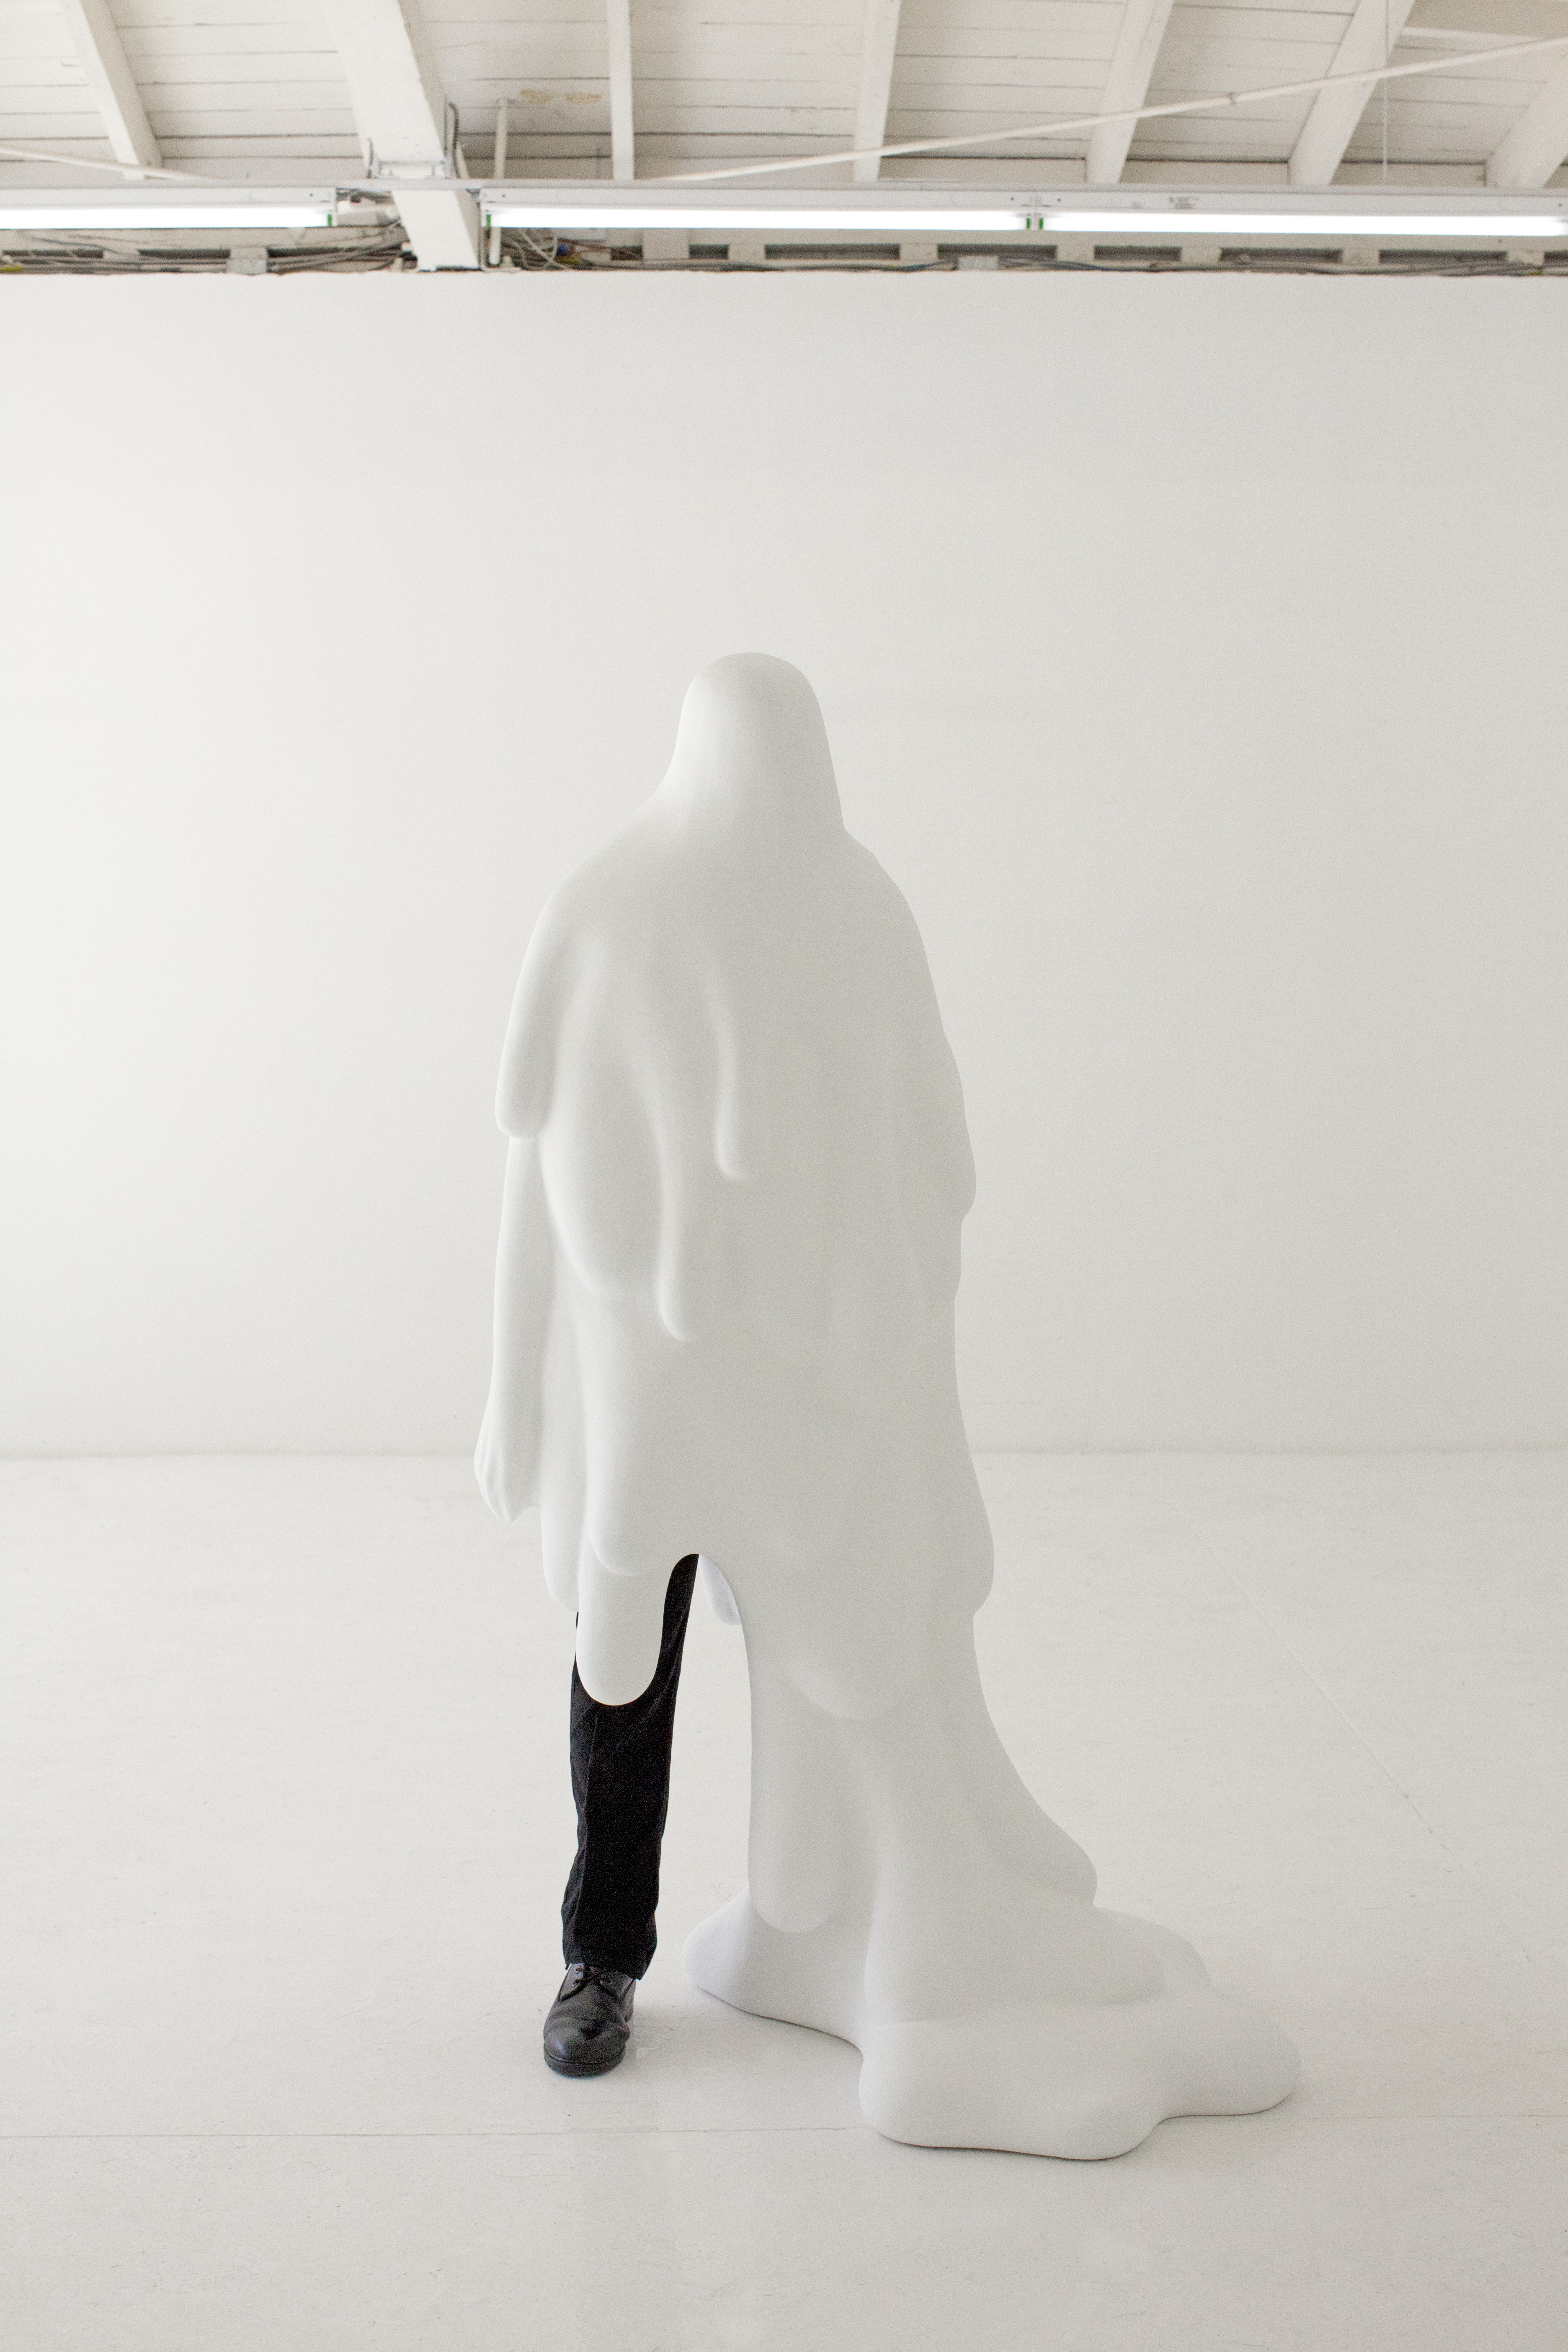 Daniel Arsham. Standing Figure with Drip, 2011, Fiberglass, paint, joint compound, mannequin, fabric, and shoe , 67 x 36 x 36 in. Courtesy of Moran Bondaroff.